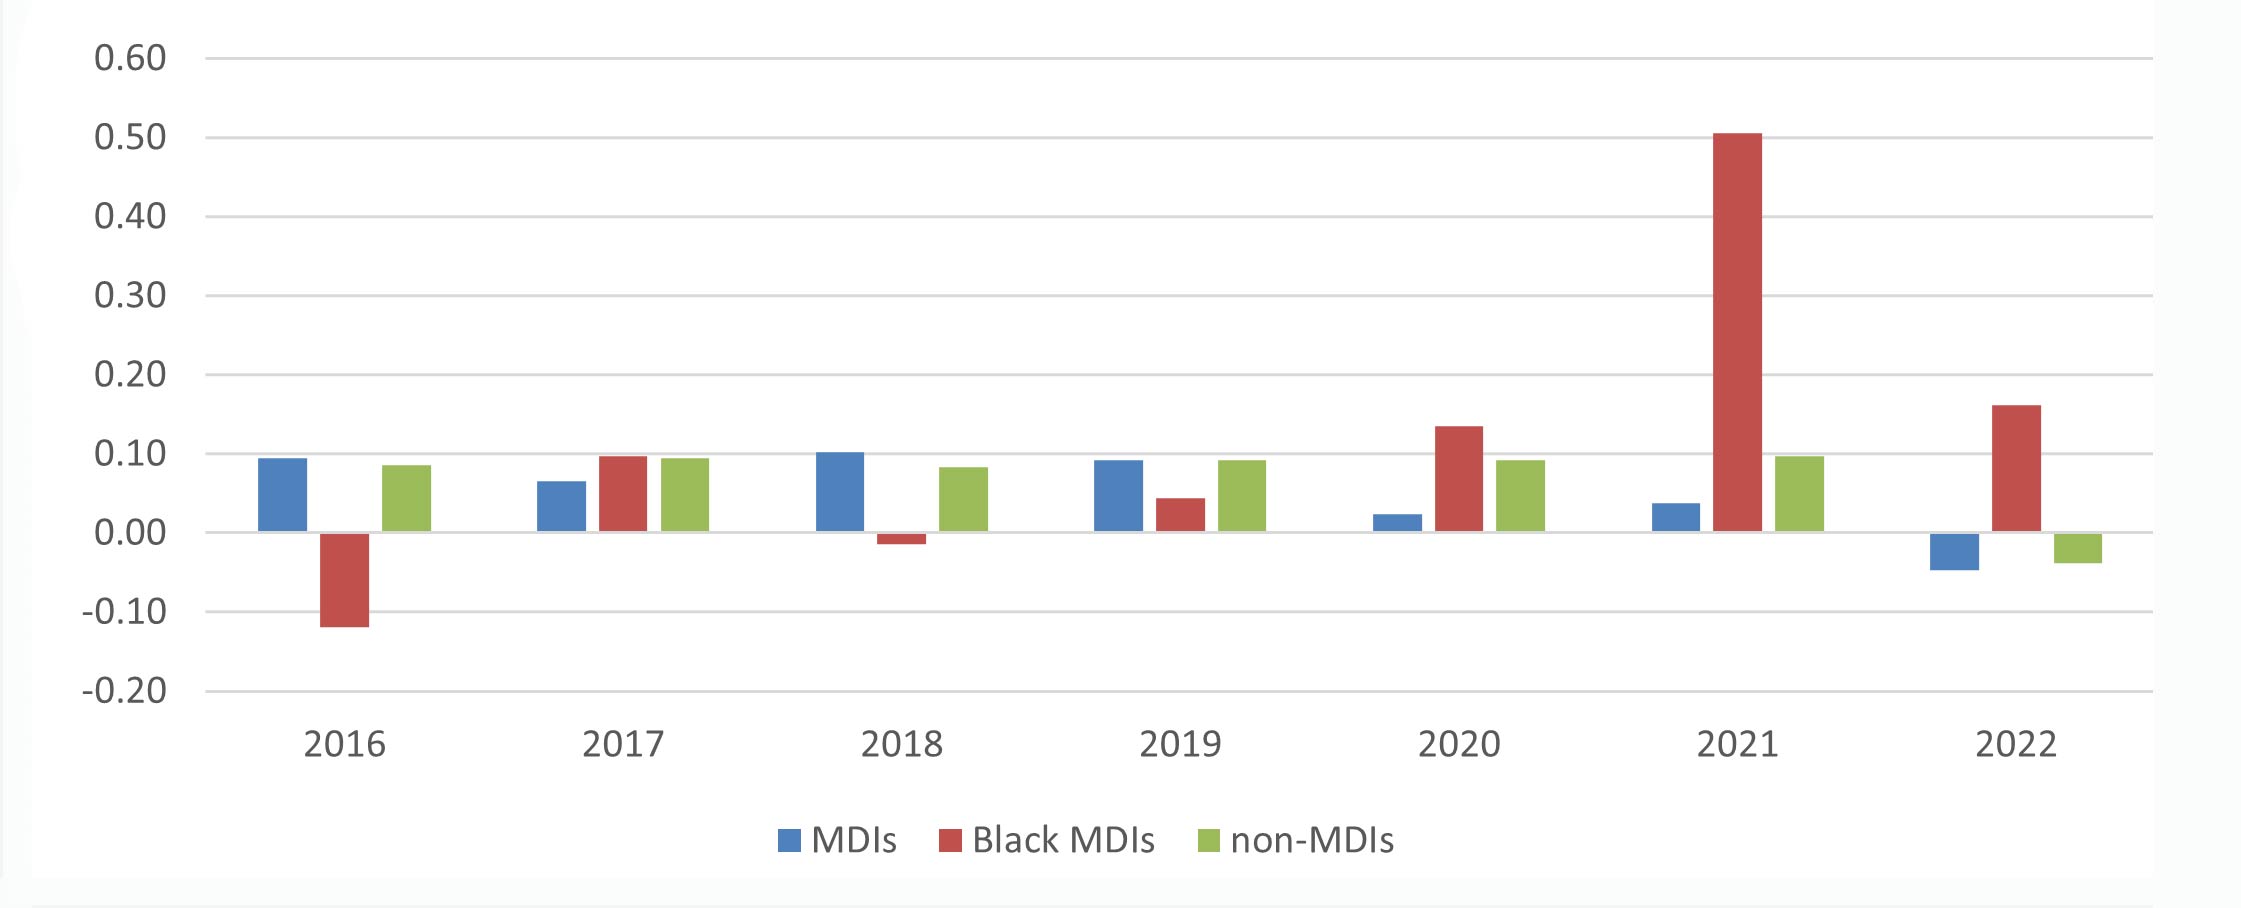 Figure 2 depicts the year-over year percent equity change average from 2016 through 2022 for MDIs, Black MDIs and Non-MDIs.